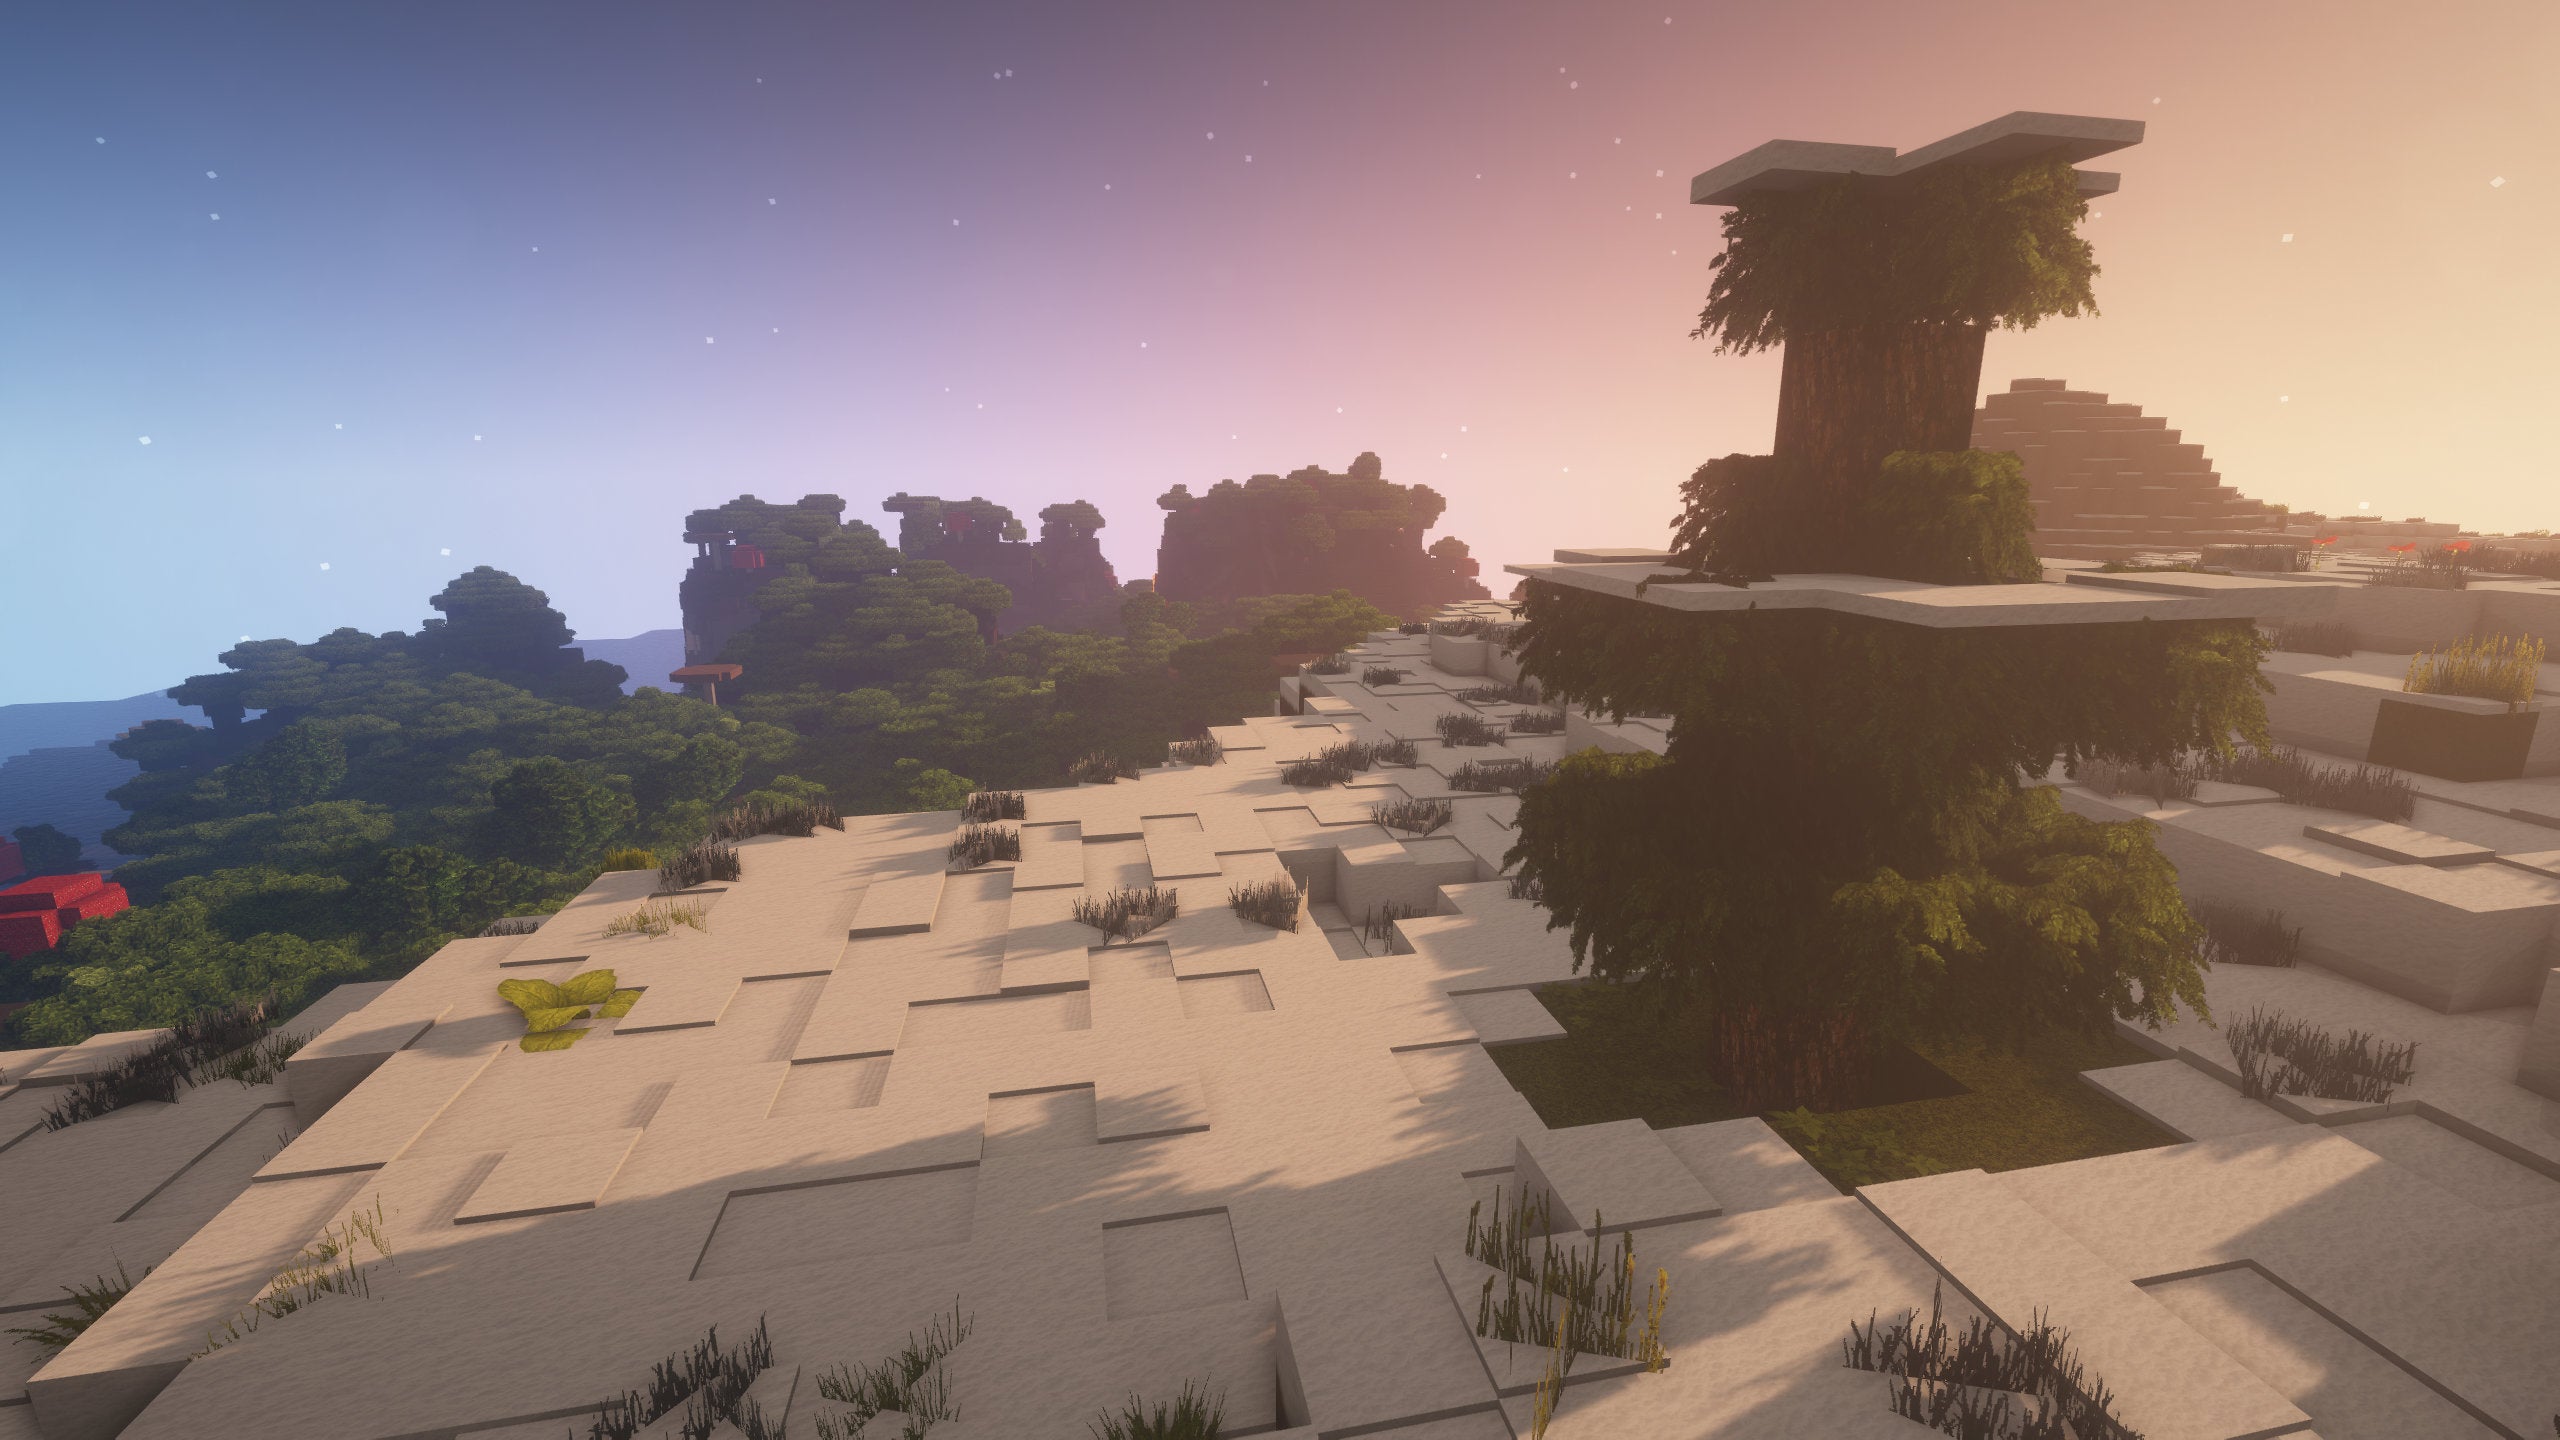 A Minecraft screenshot of a landscape displayed using the LB Photo Realism Texture Pack.